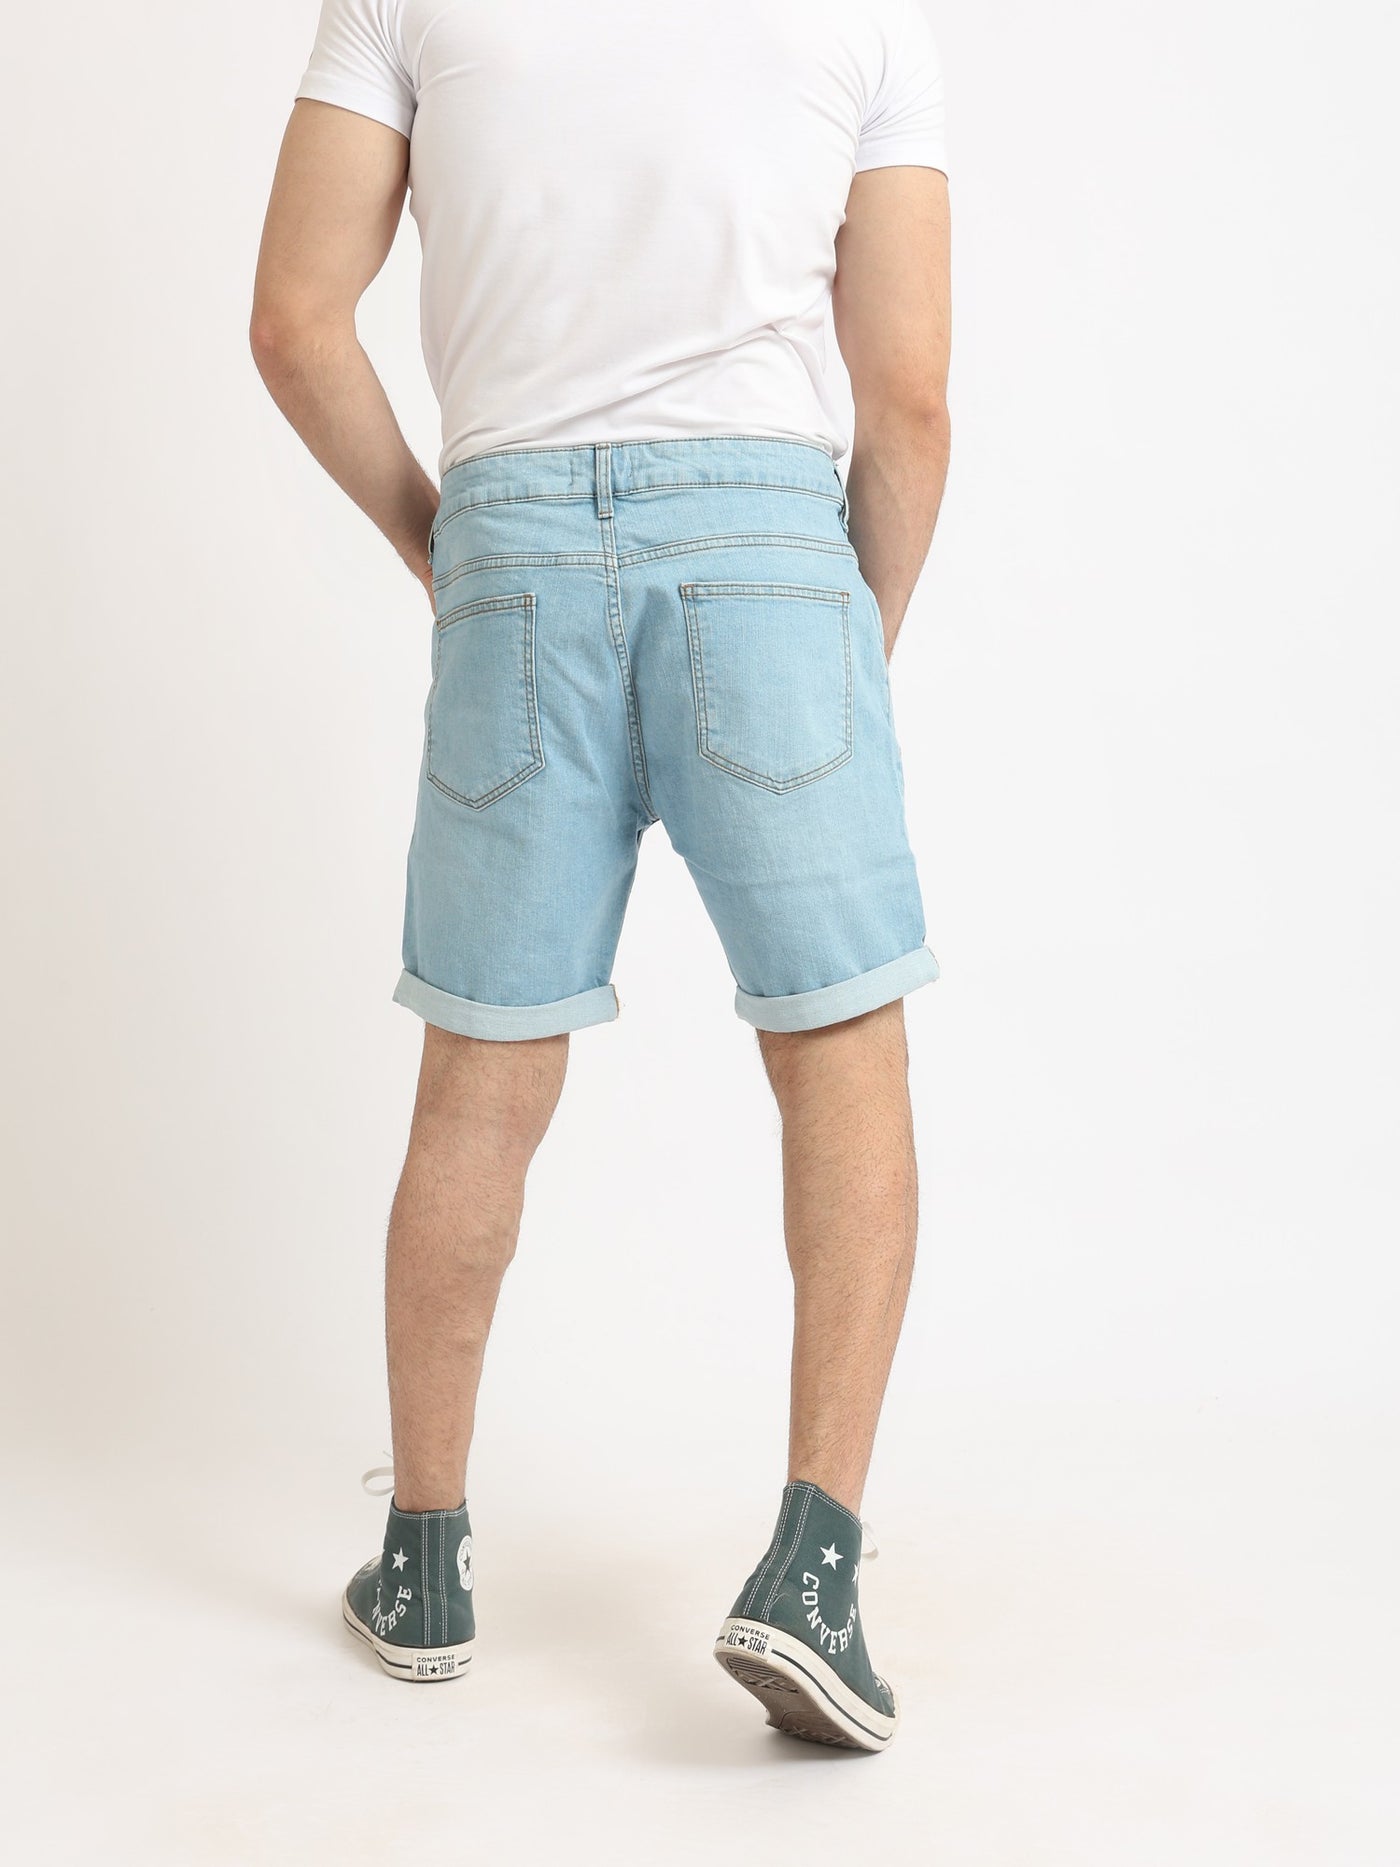 Jeans Short - Drawstring - With Pockets